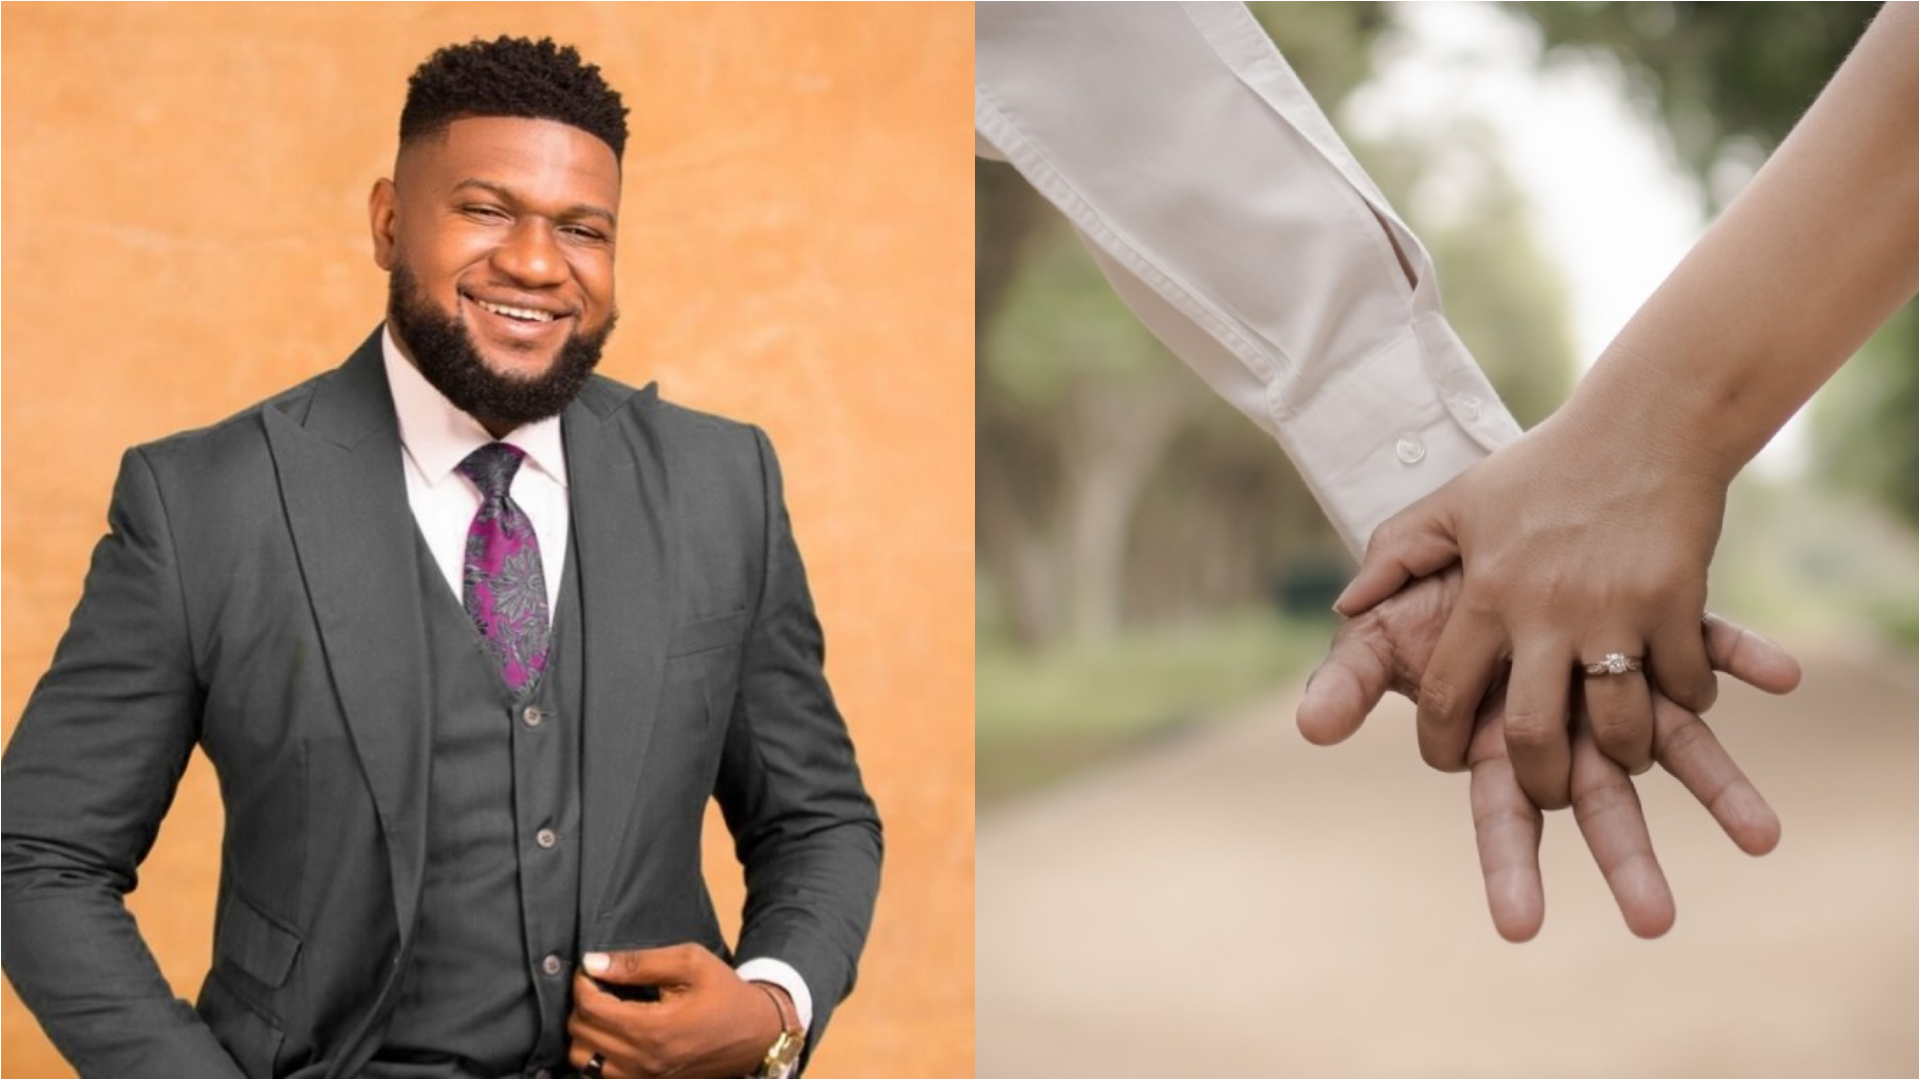 Nigerian man reveals unique measures to avoid cheating and remain faithful to wife